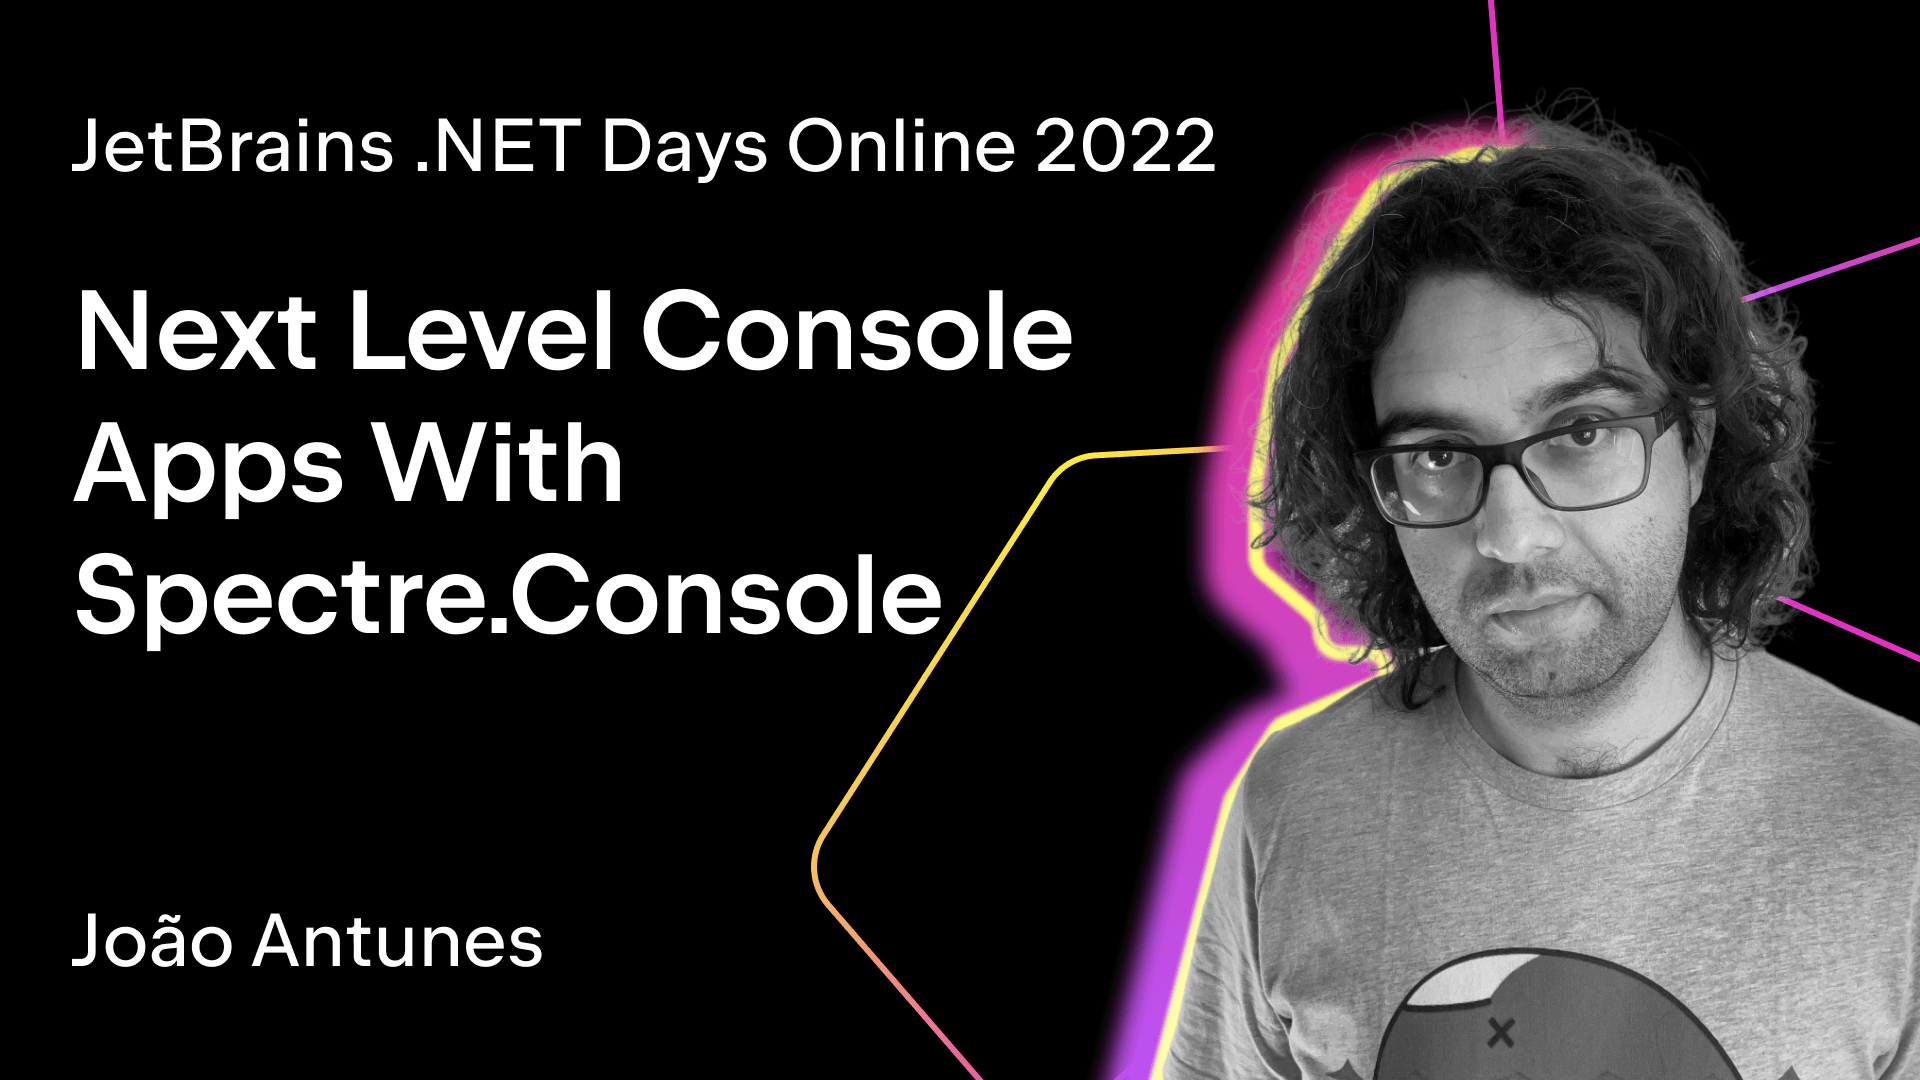 Next level console apps with Spectre.Console